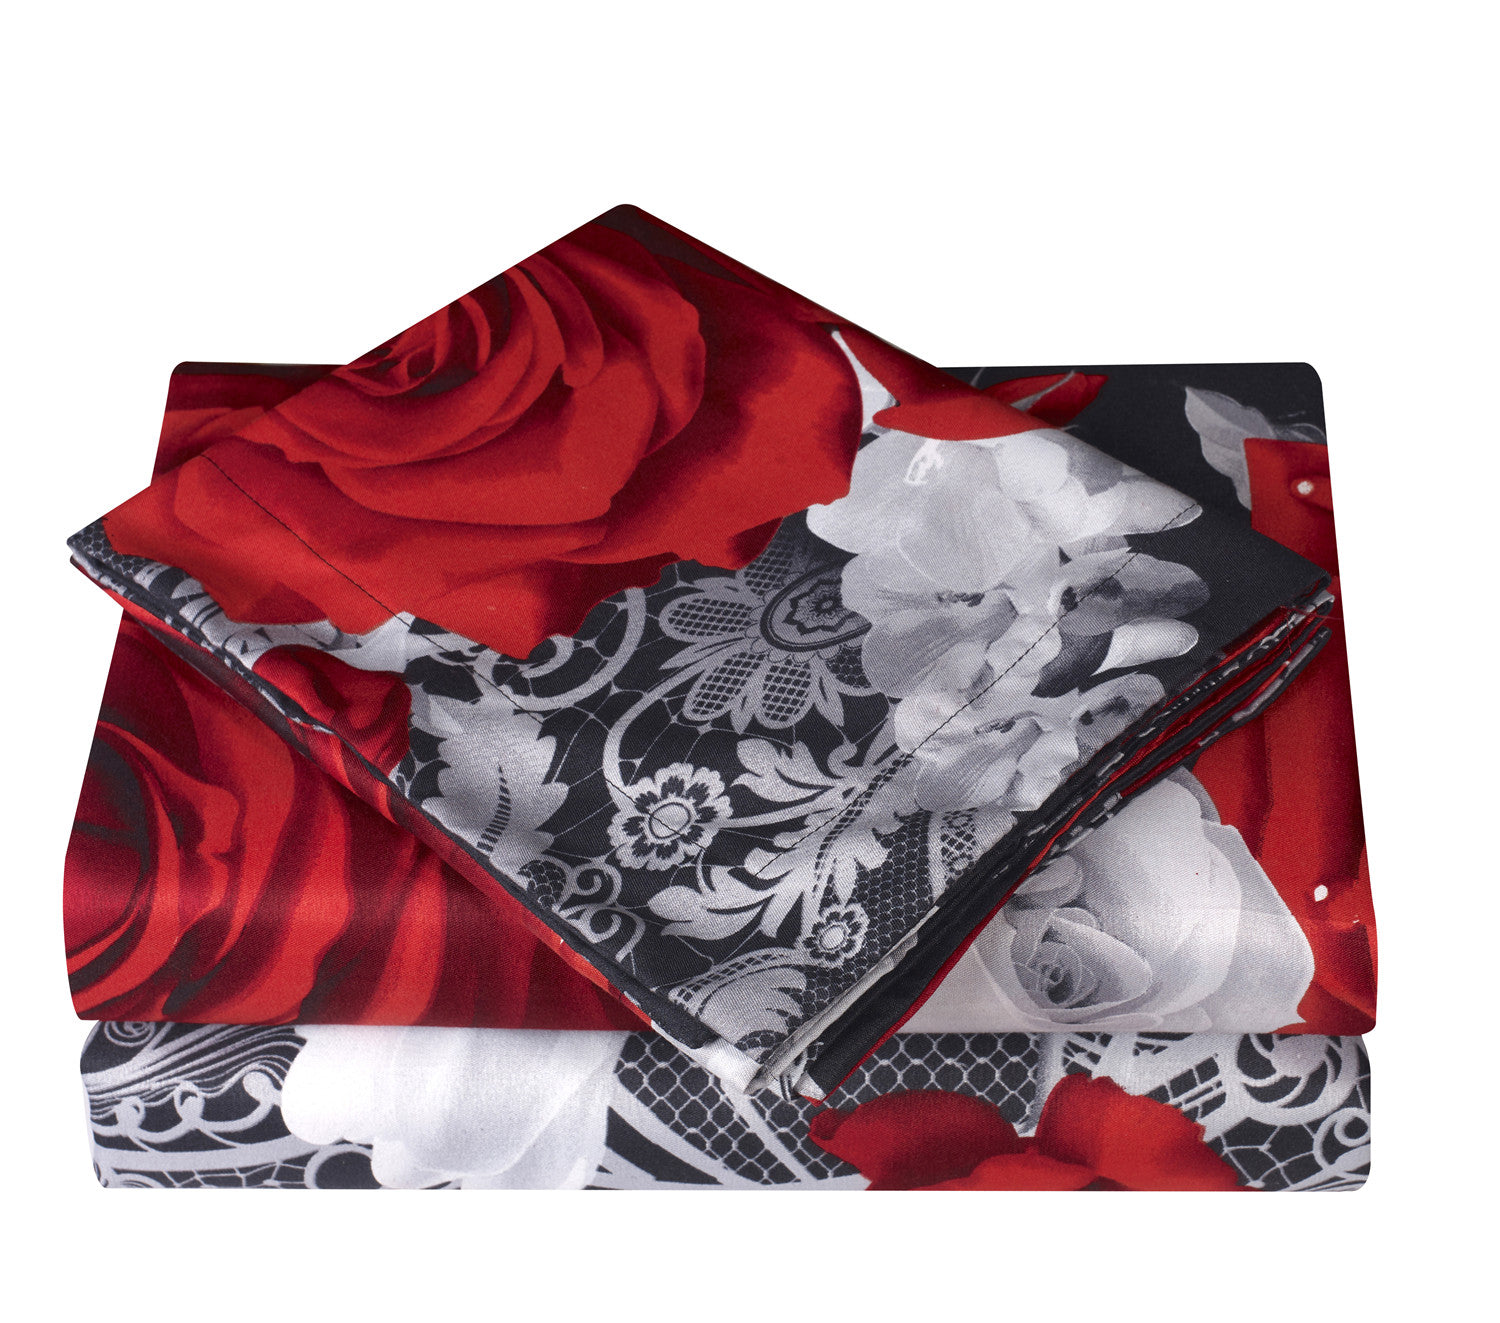 WHITE AND RED ROSE 4PC PRINTED BEDDING SHEET SET - BREATHABLE AND COOLING SHEETS - HOTEL LUXURY - EXTRA SOFT - WRINKLE, FADE, STAIN RESISTANCE